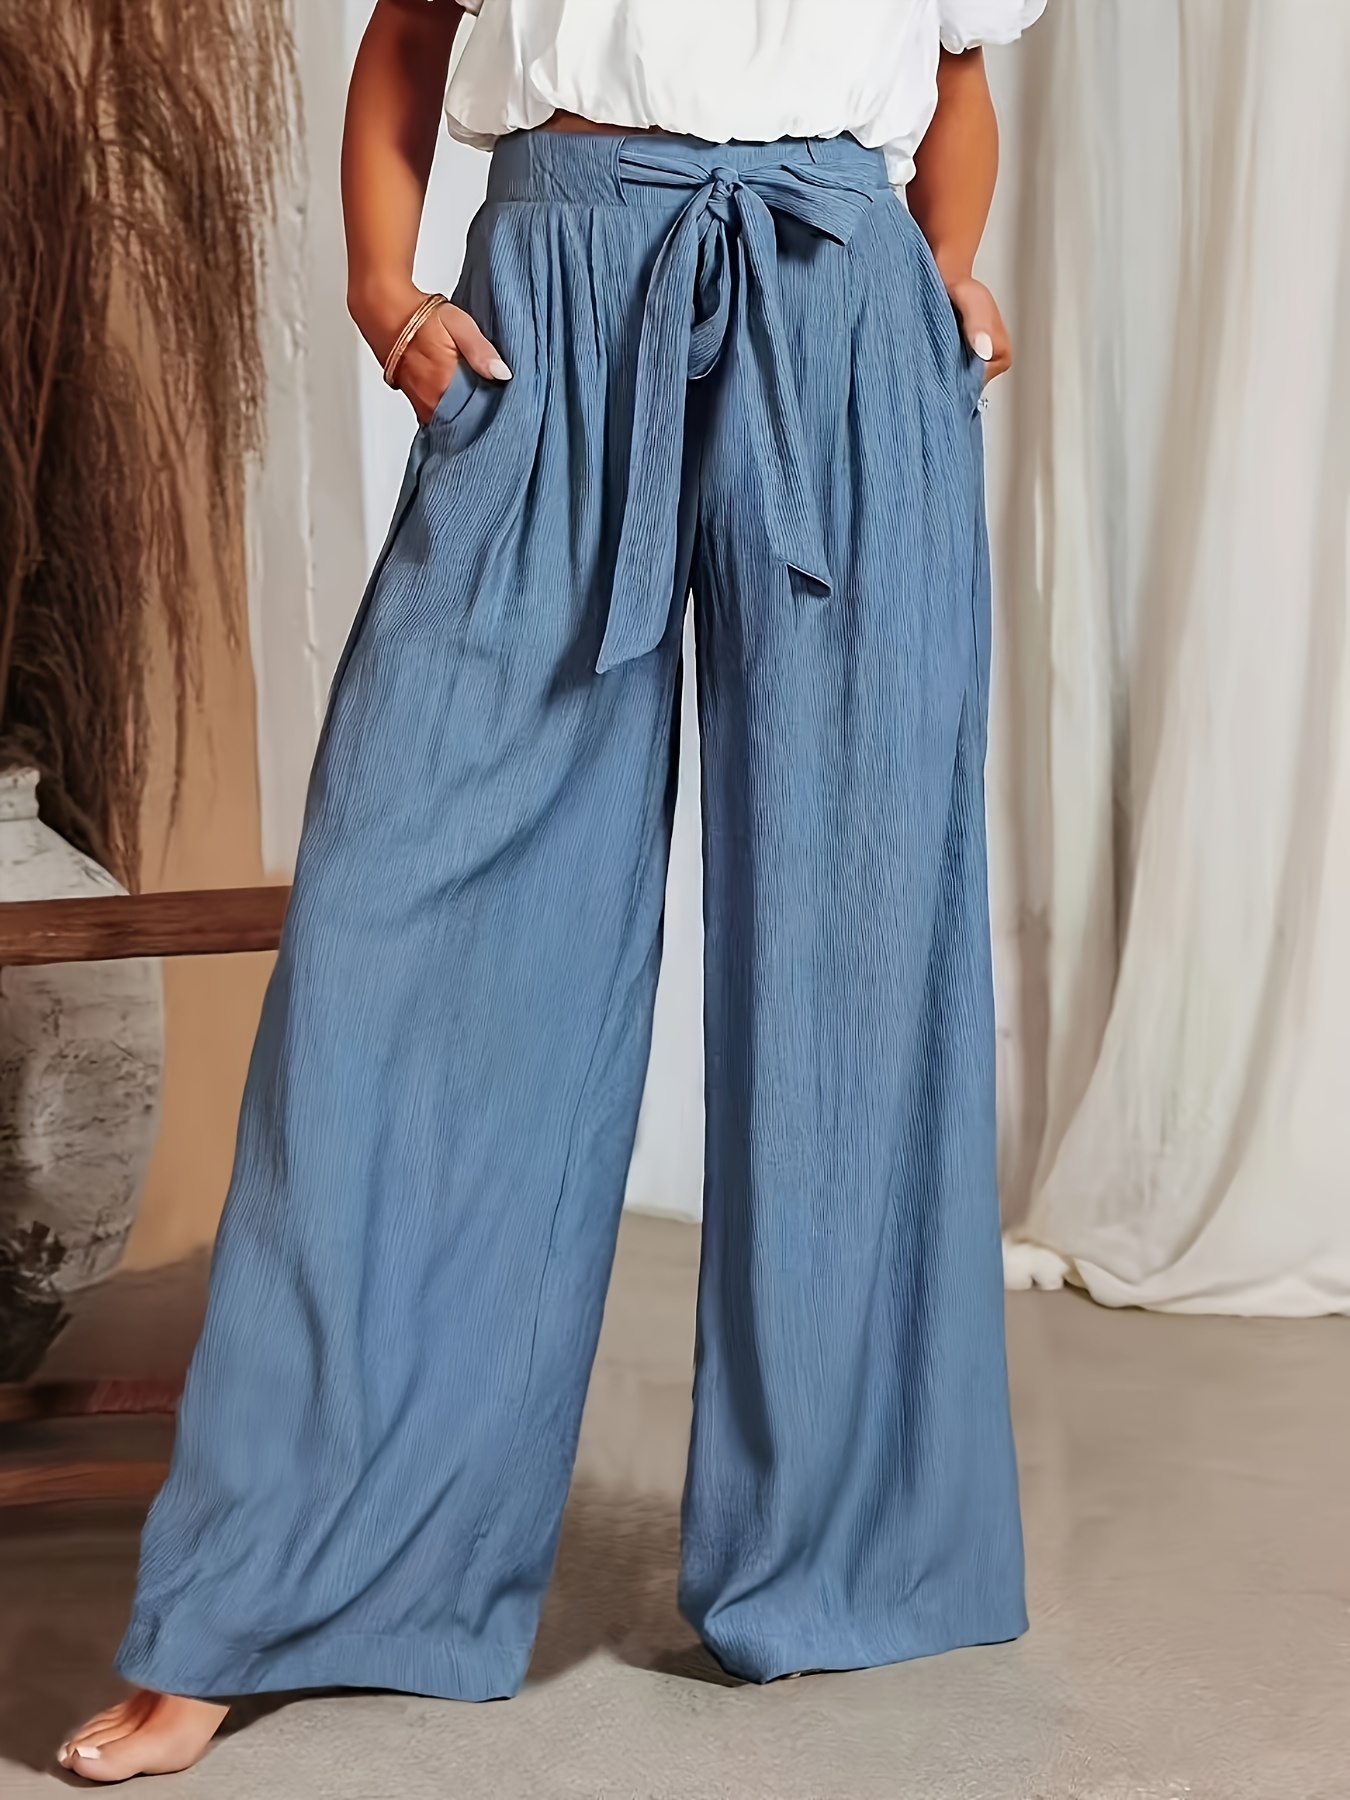 Women Casual Beach Wide Leg Trousers Elastic Waist Vintage Floral Print  Trousers Long Palazzo Pants with Pockets